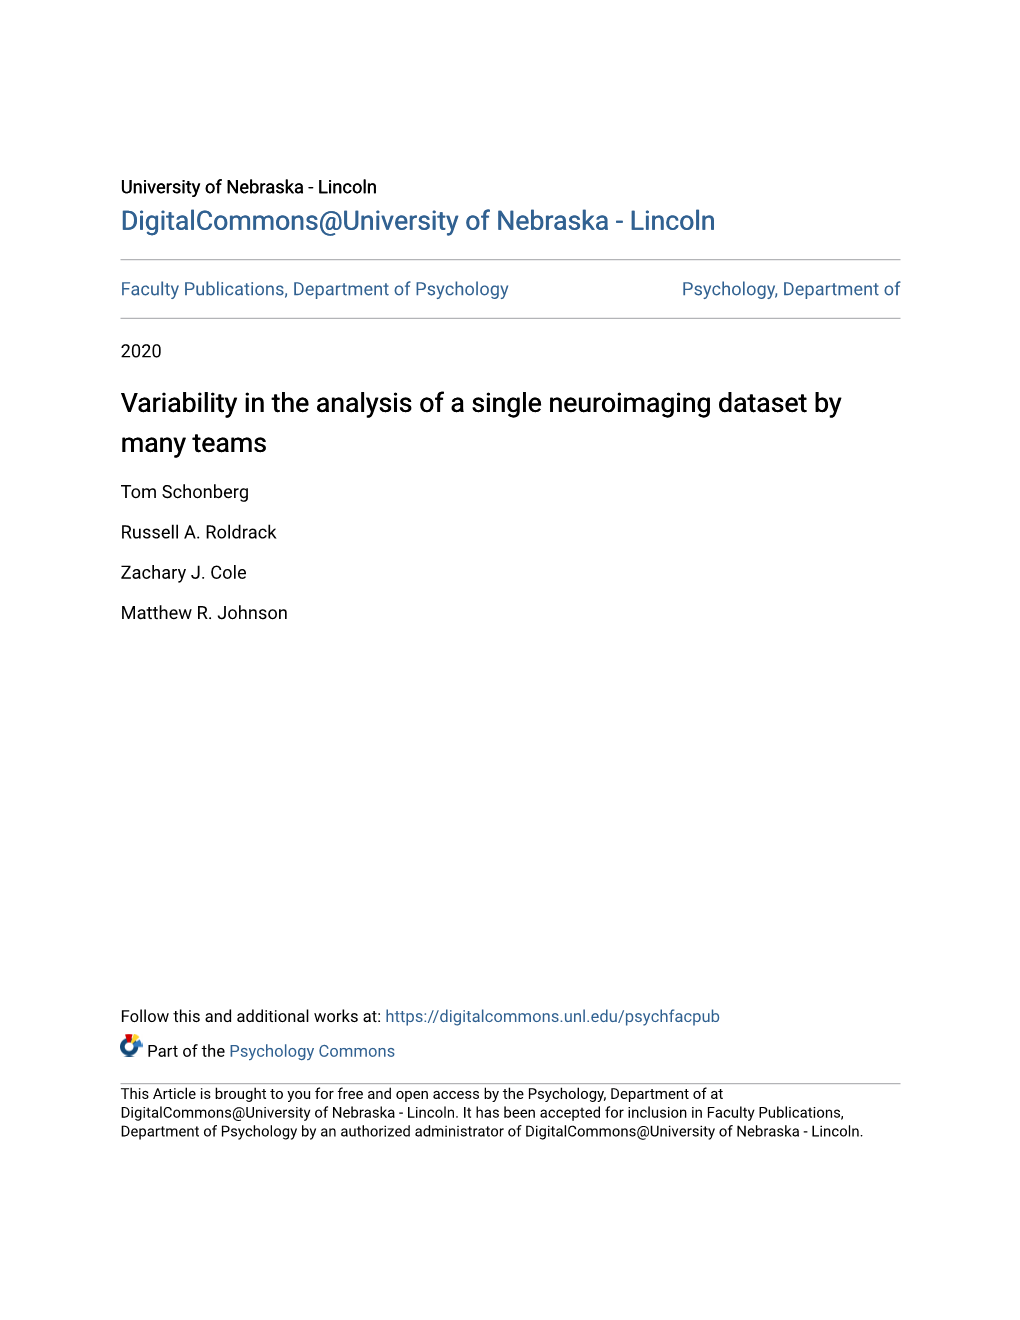 Variability in the Analysis of a Single Neuroimaging Dataset by Many Teams